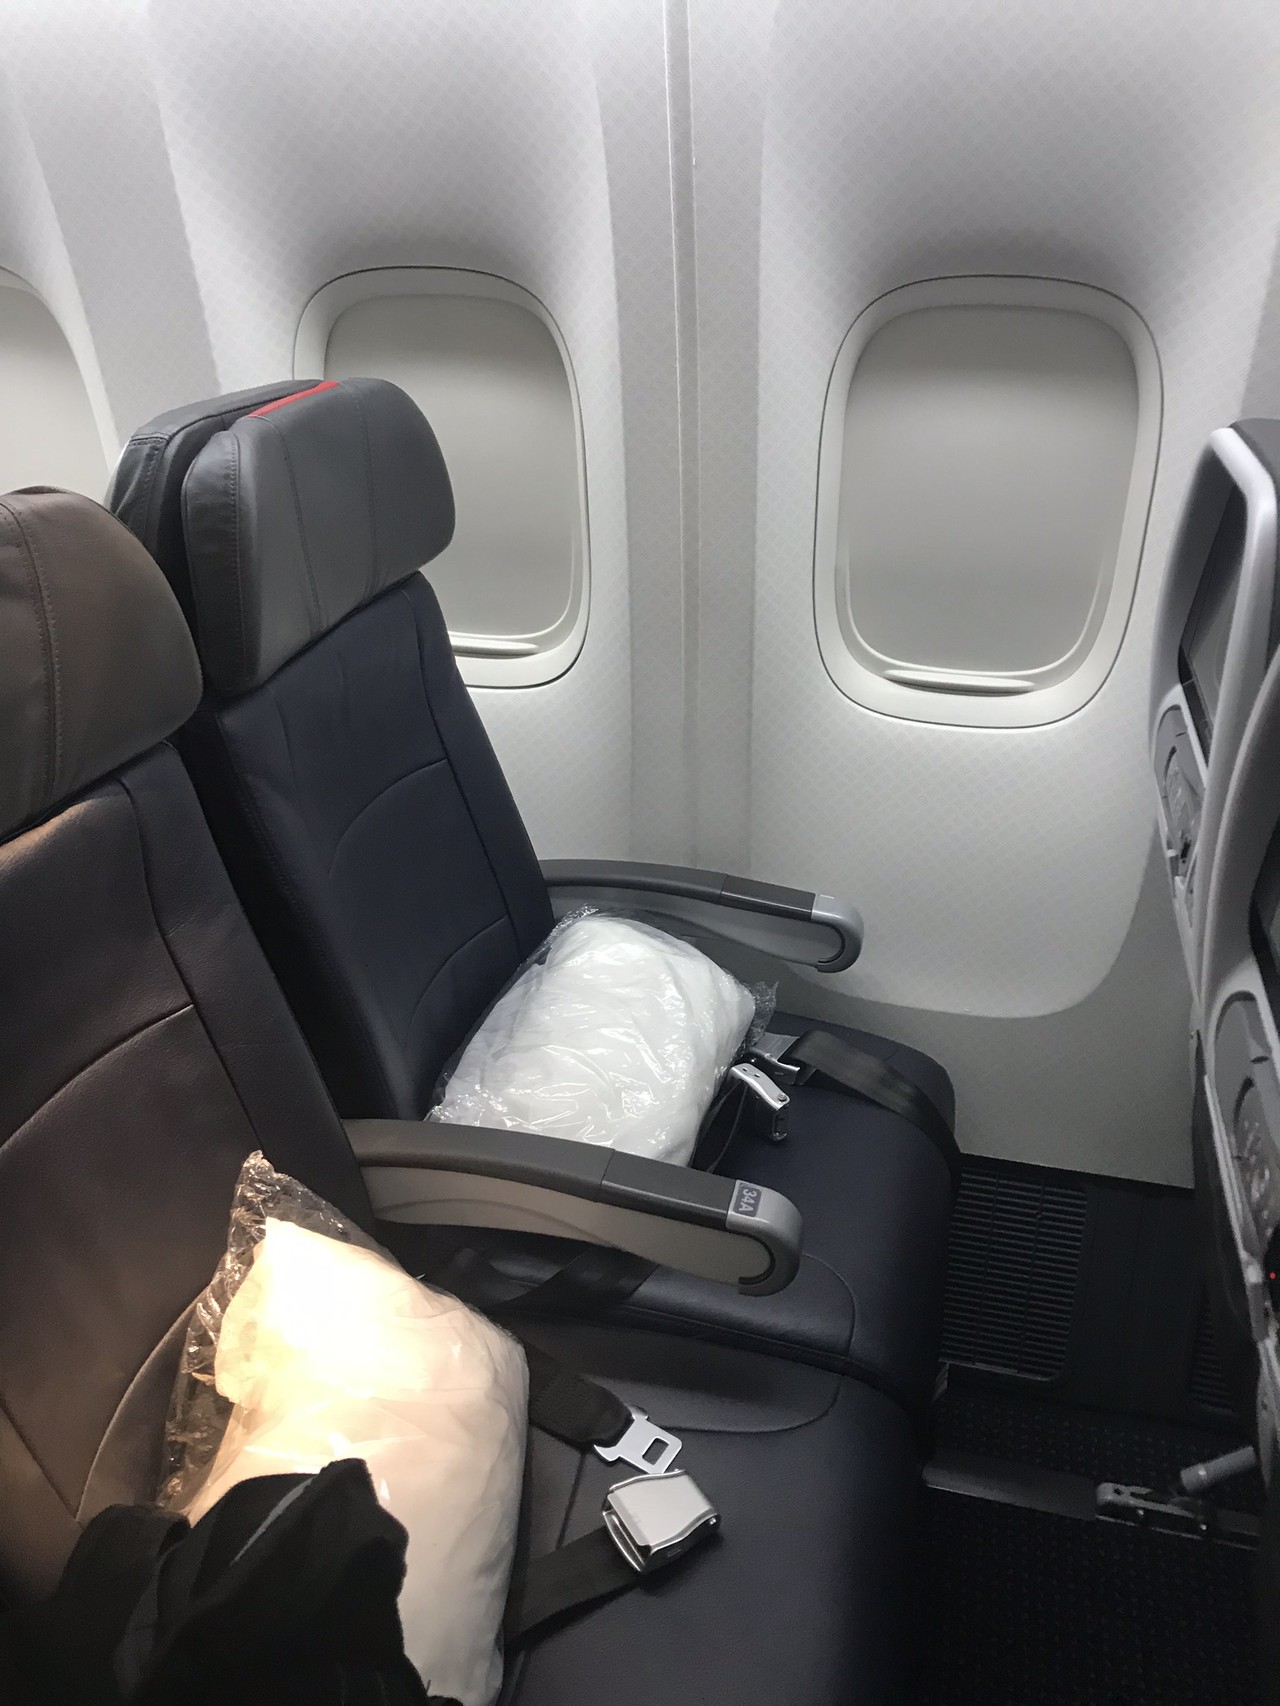 Review of American Airlines flight from Raleigh to London in Economy